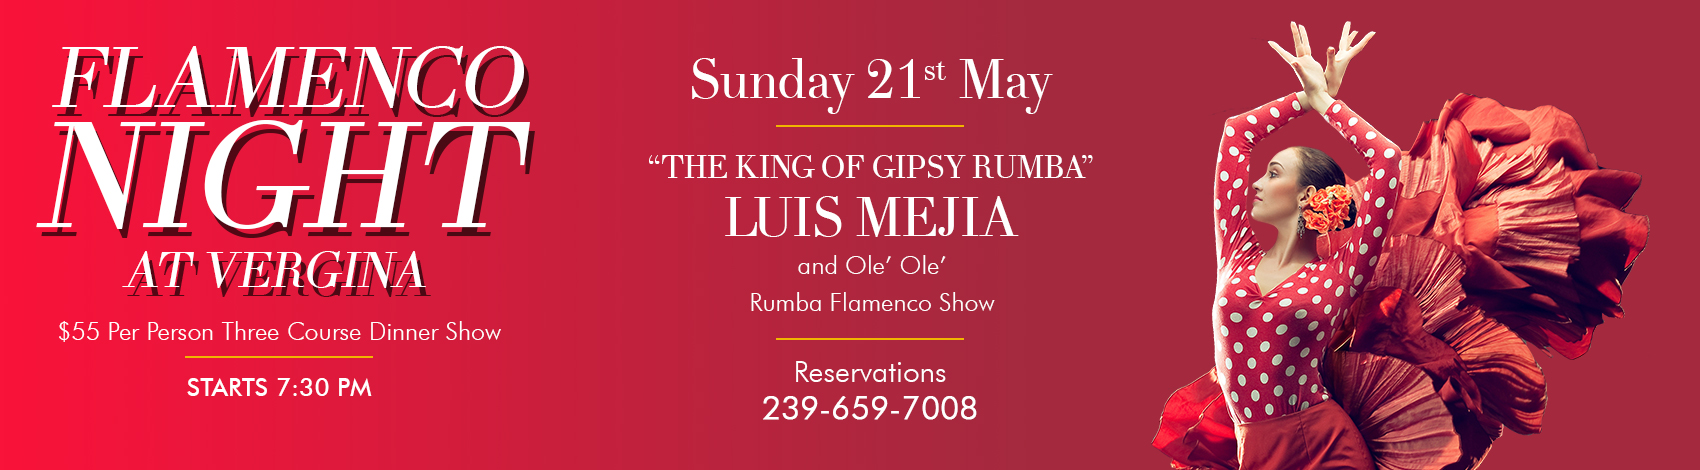 May 21st The King of Gipsy Rumba LUIS MEJIA and Ole’ Ole’ Rumba Flamenco Show, Three Course Dinner Show Menu $565 Per Person